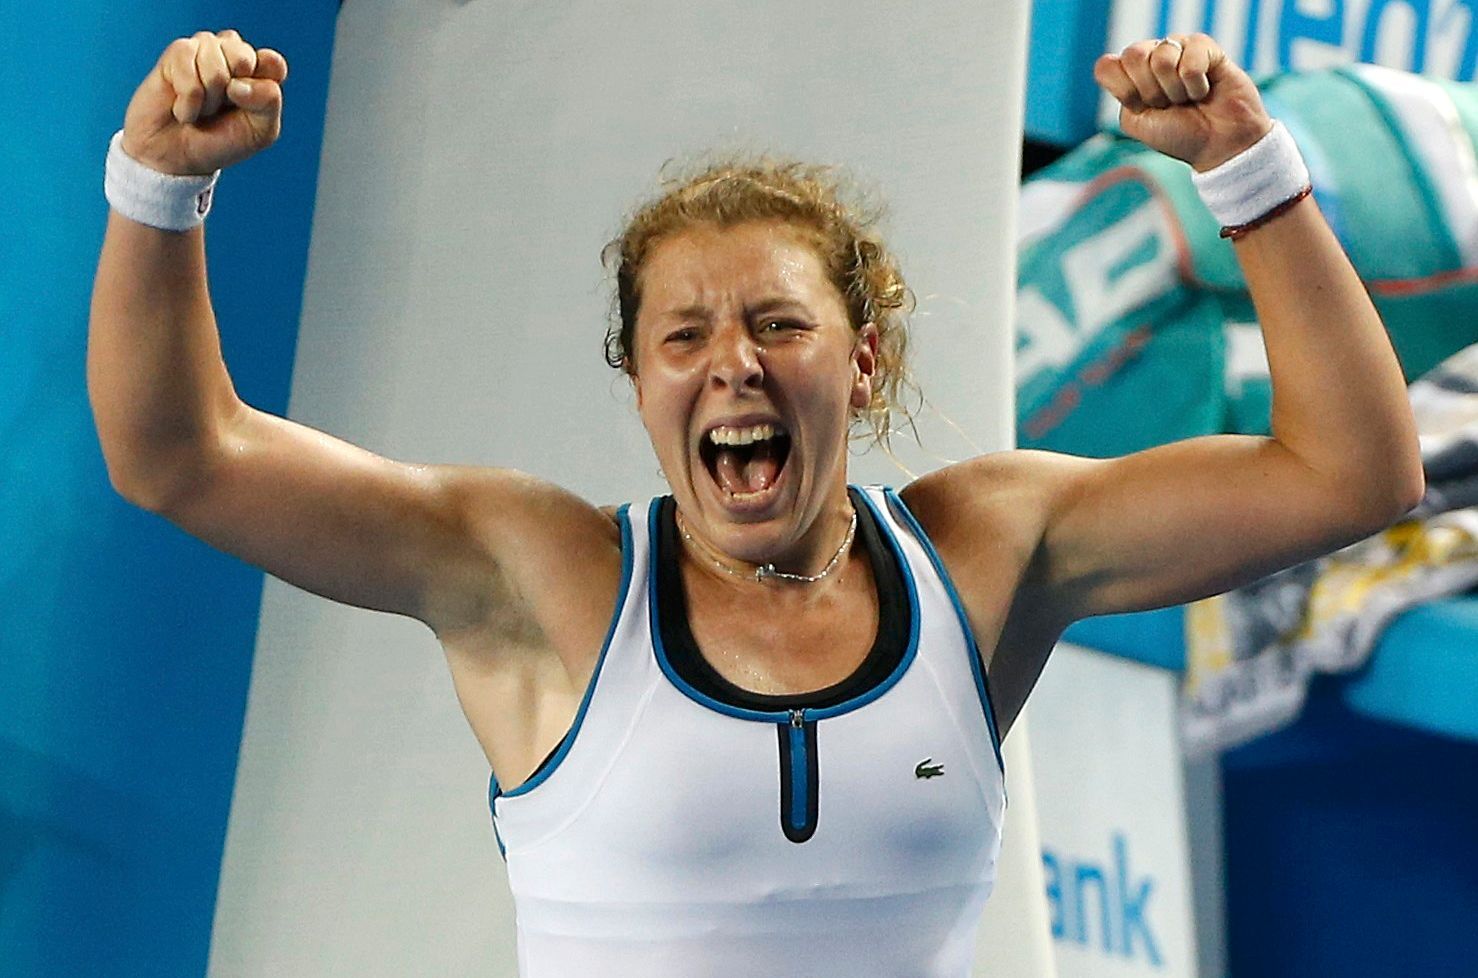 Germany's Friedsam celebrates after winning her third round match against Italy's Vinci at the Australian Open tennis tournament at Melbourne Park